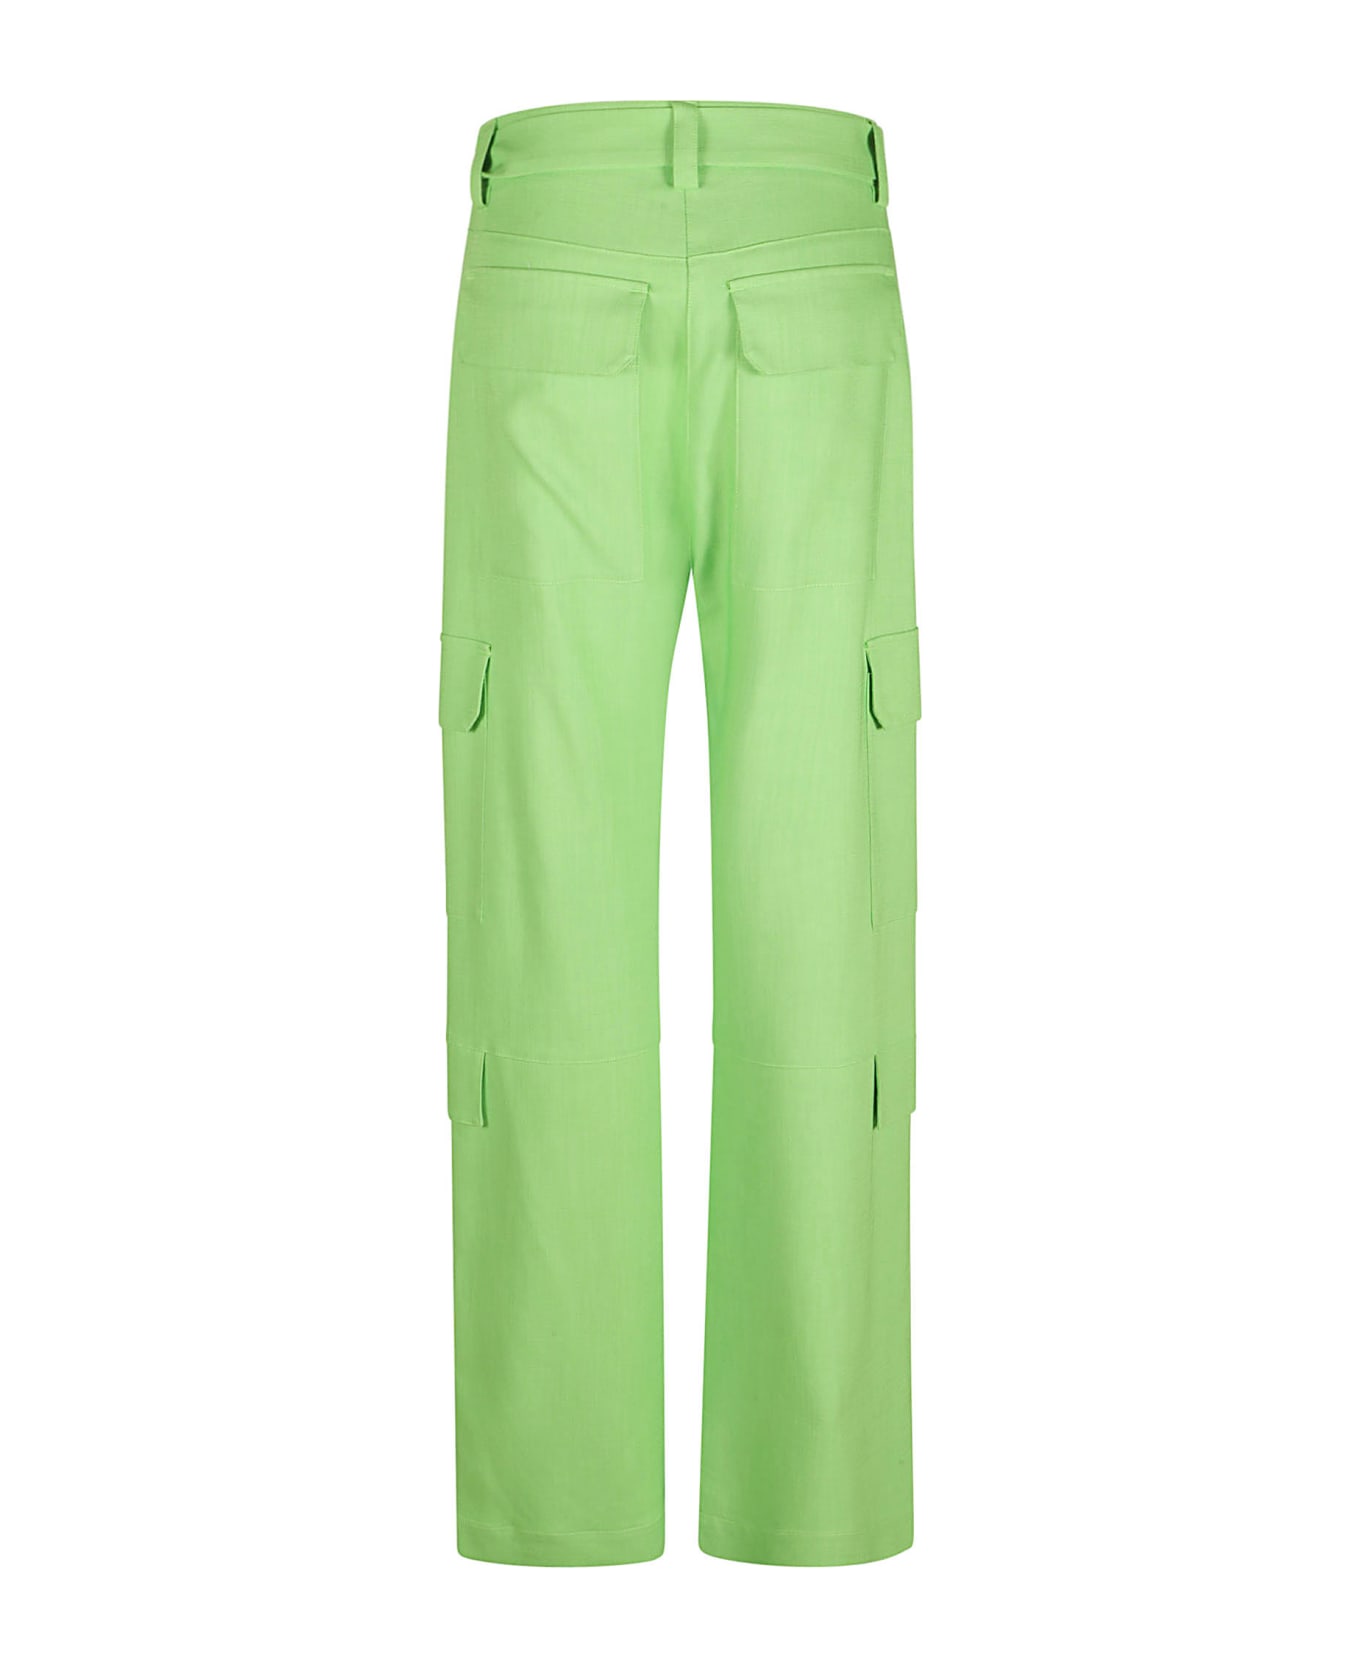 MSGM Belted Cargo Trousers - Acid Green ボトムス